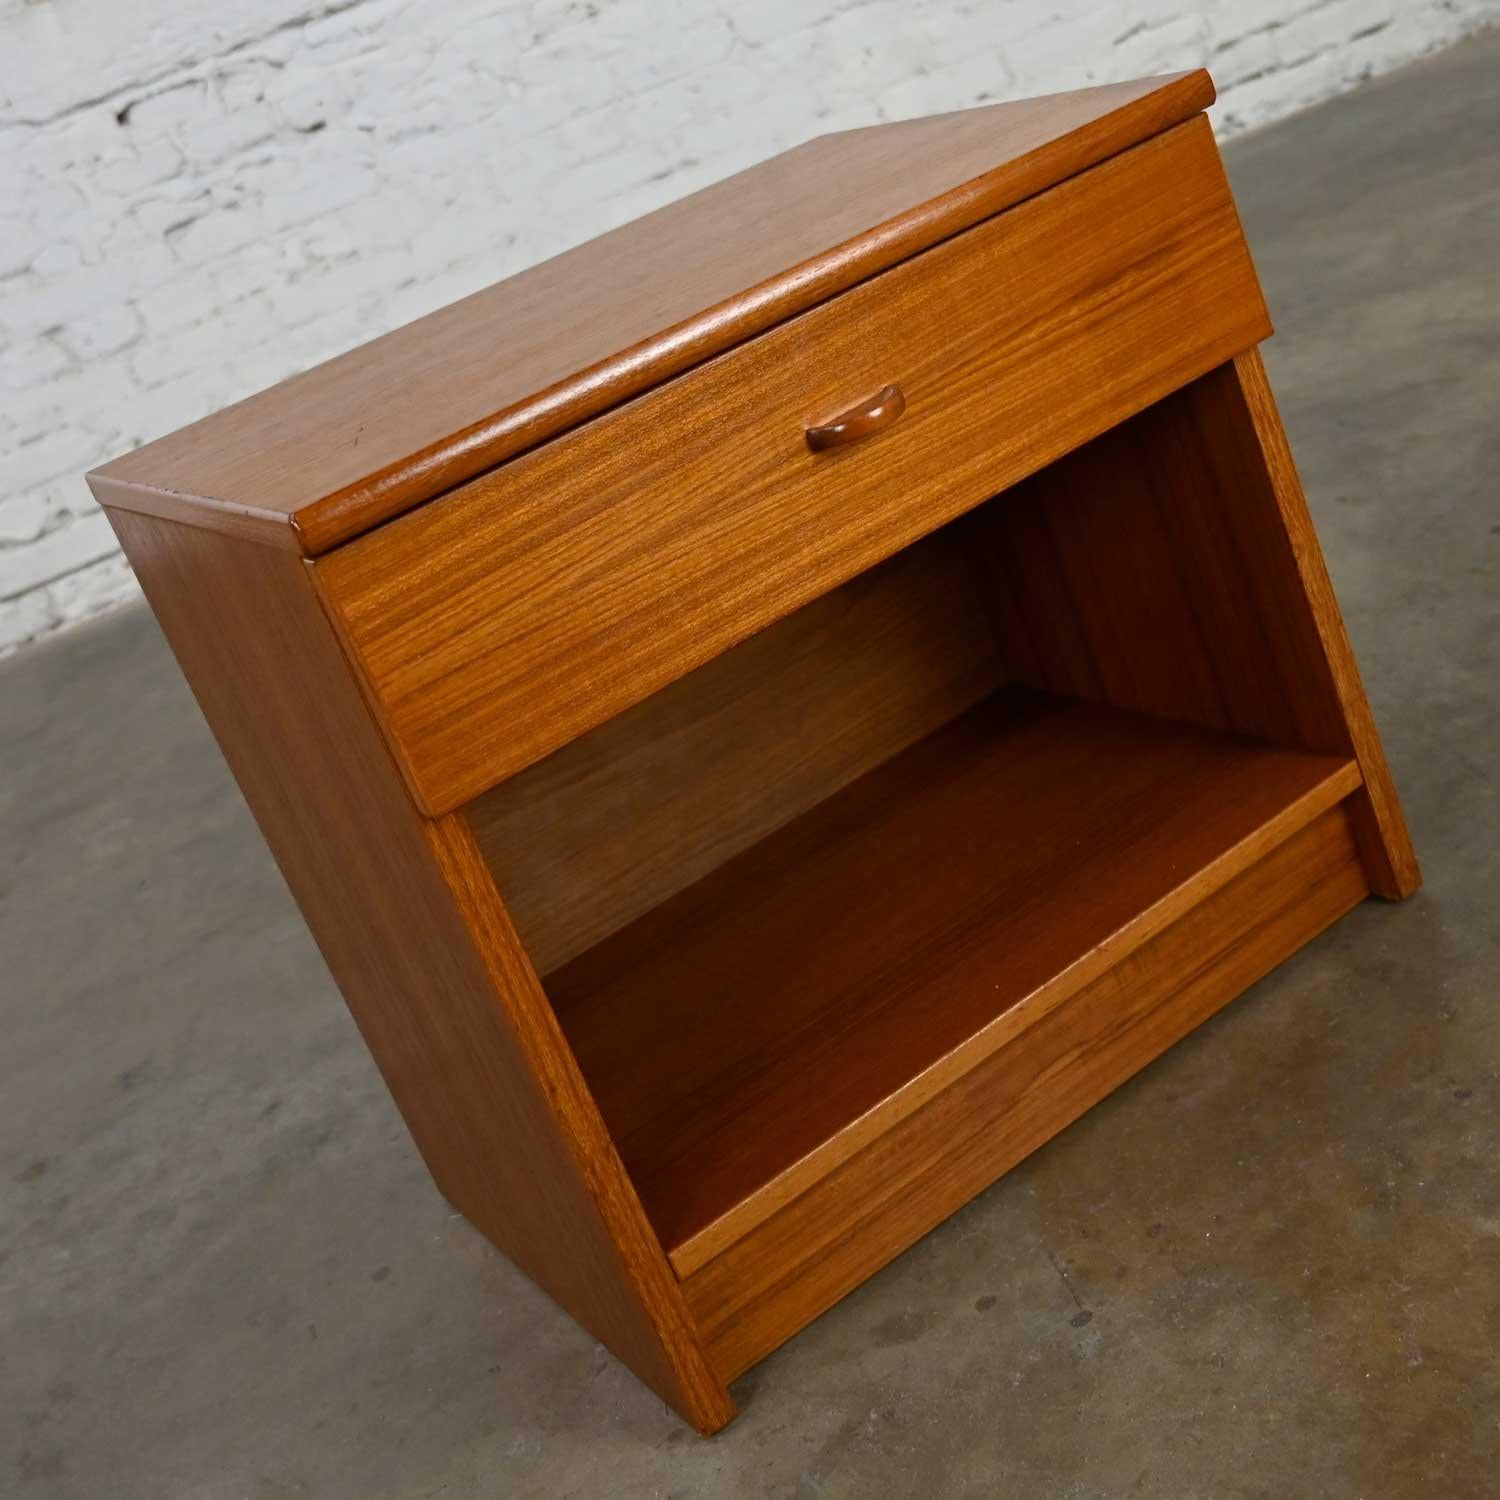 20th Century Scandinavian Modern Teak Nightstand End Table Cabinet with Drawer by FBJ Mobler For Sale